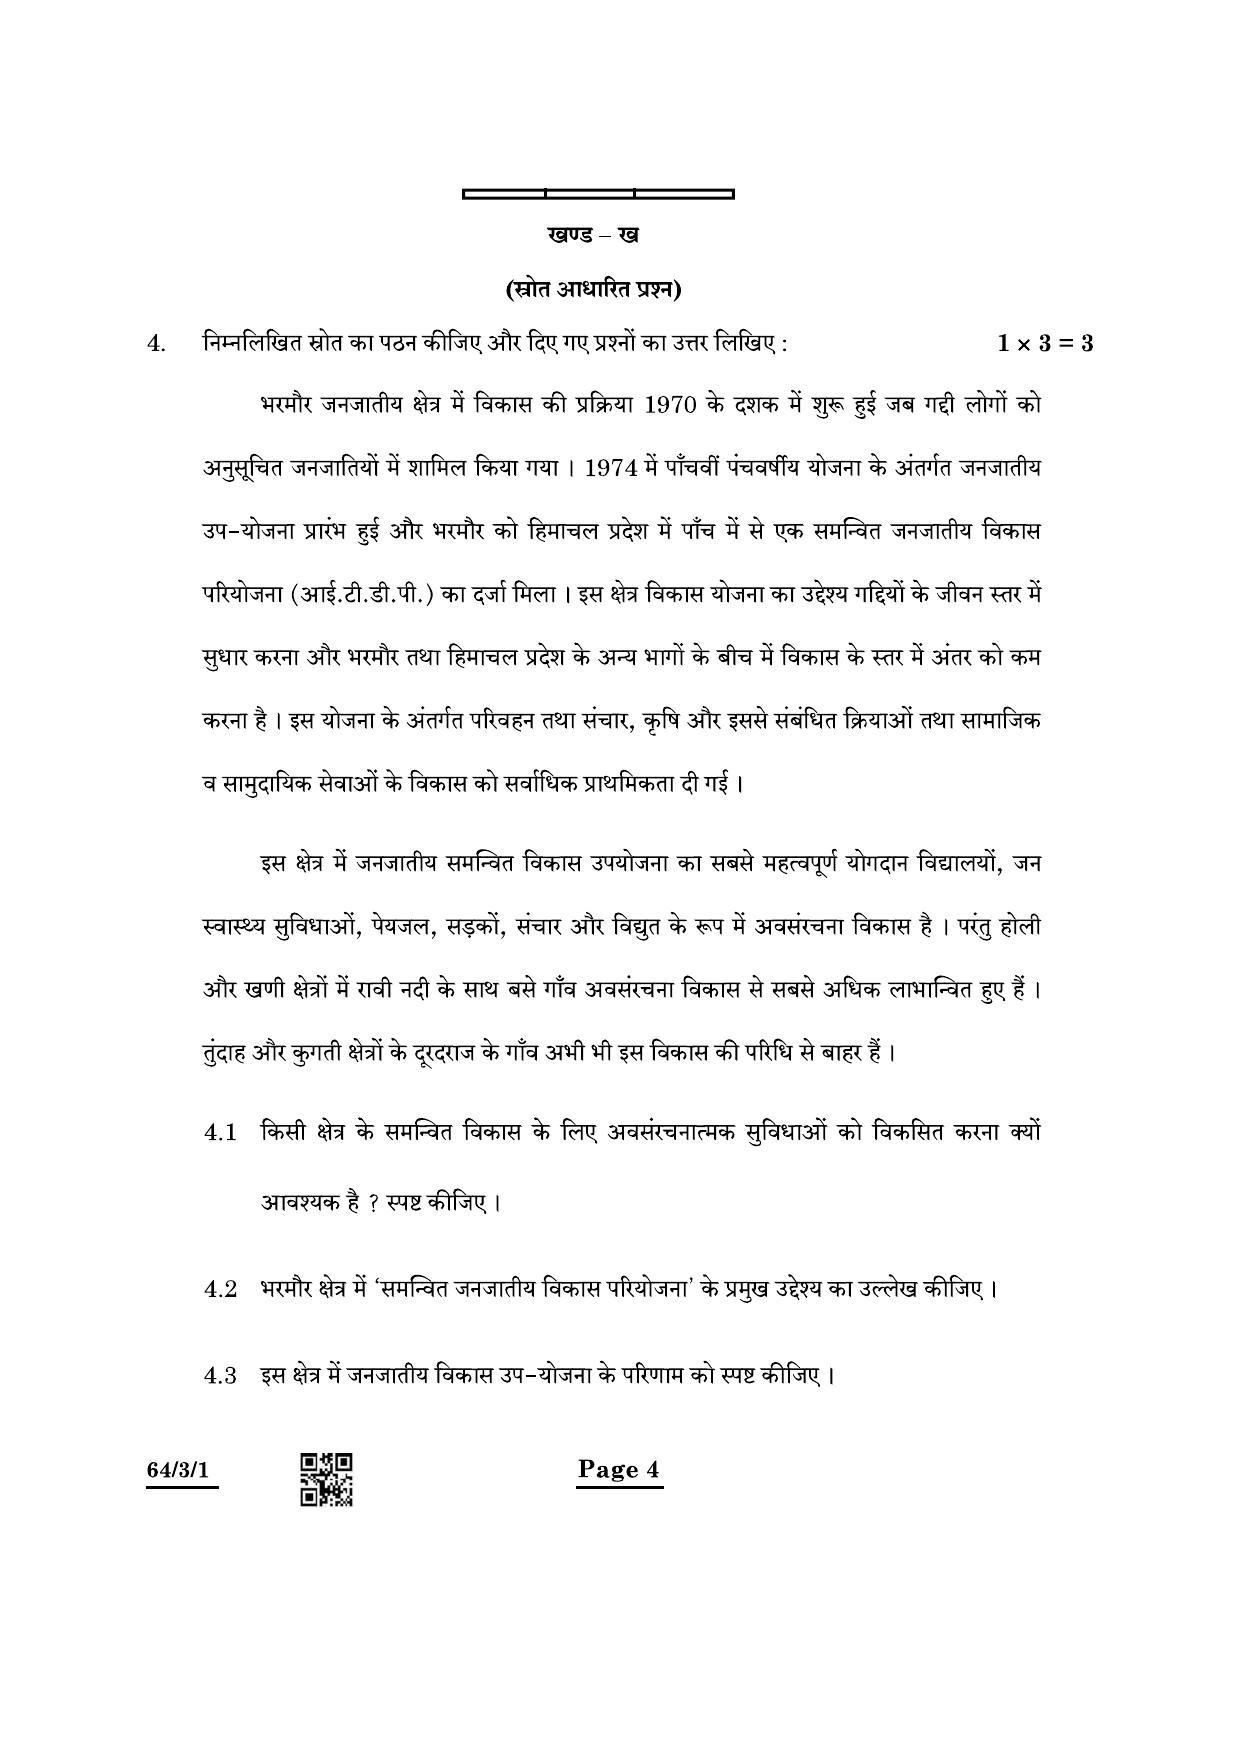 CBSE Class 12 64-3-1 Geography 2022 Question Paper - Page 4